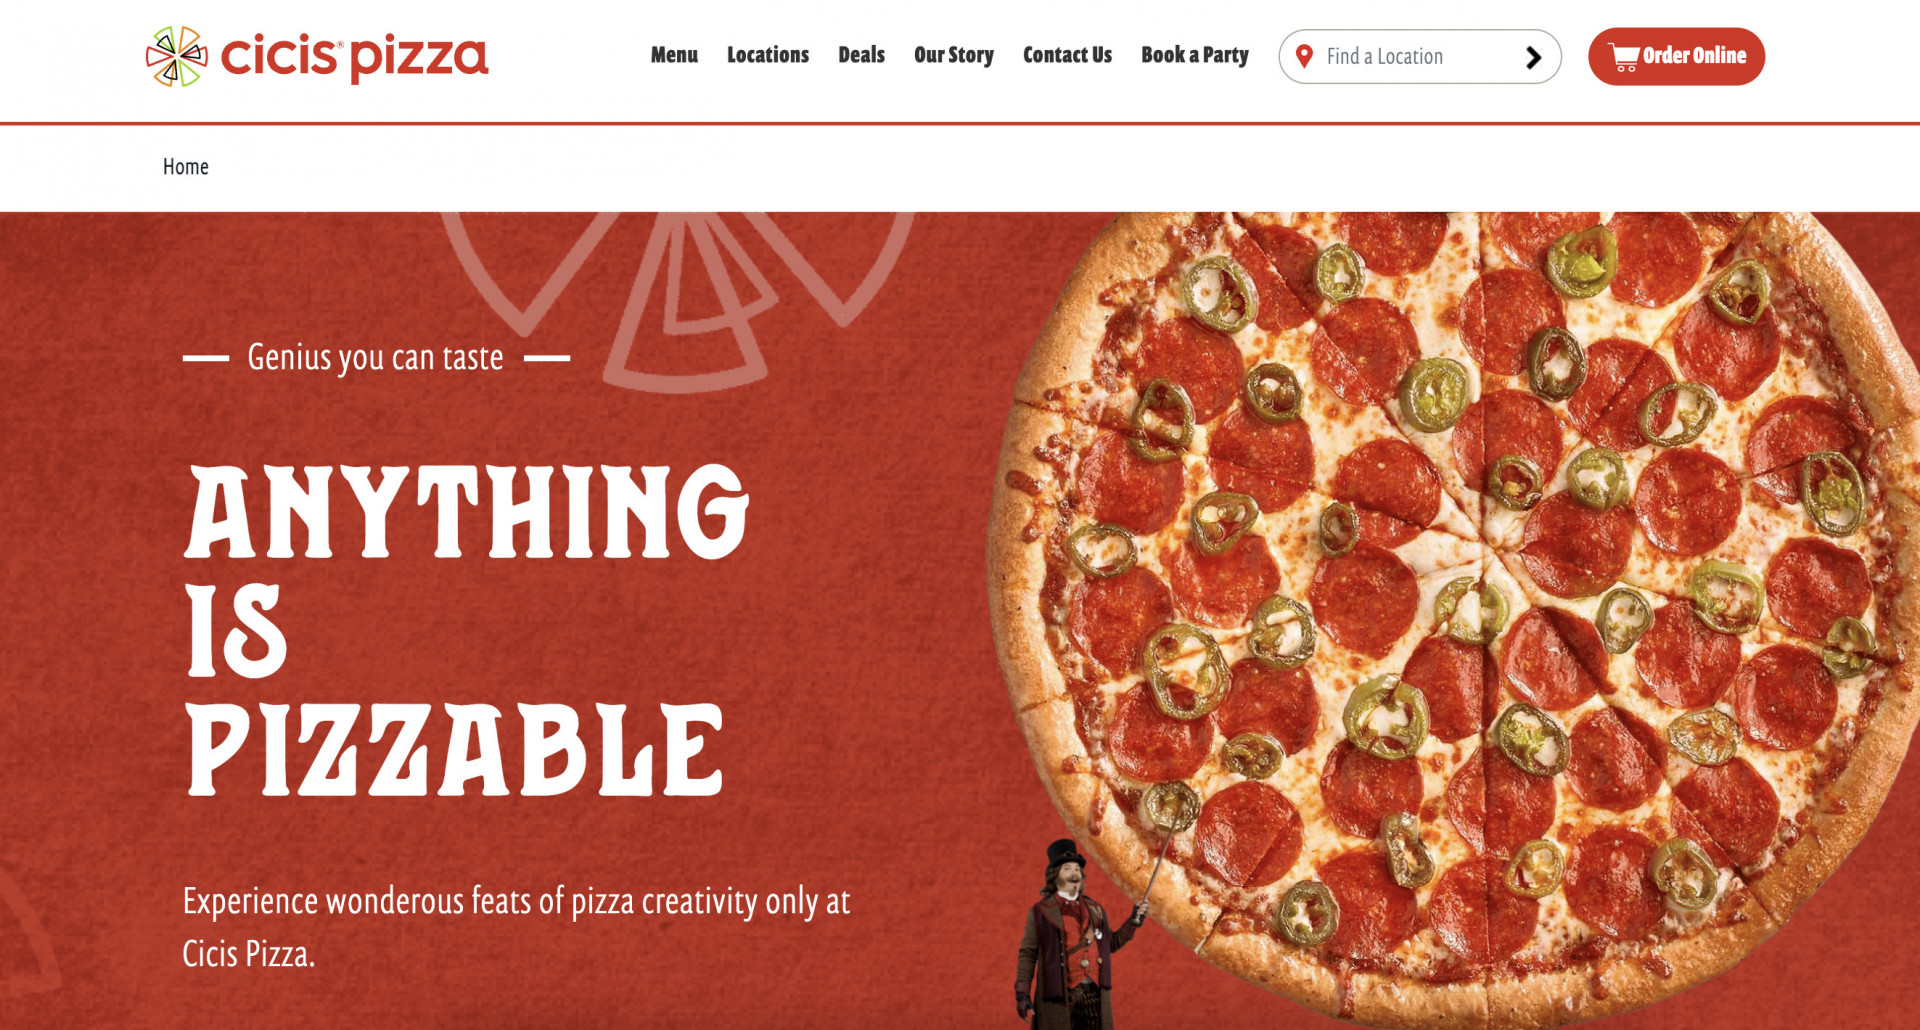  pizza website template example Cici’s Pizza